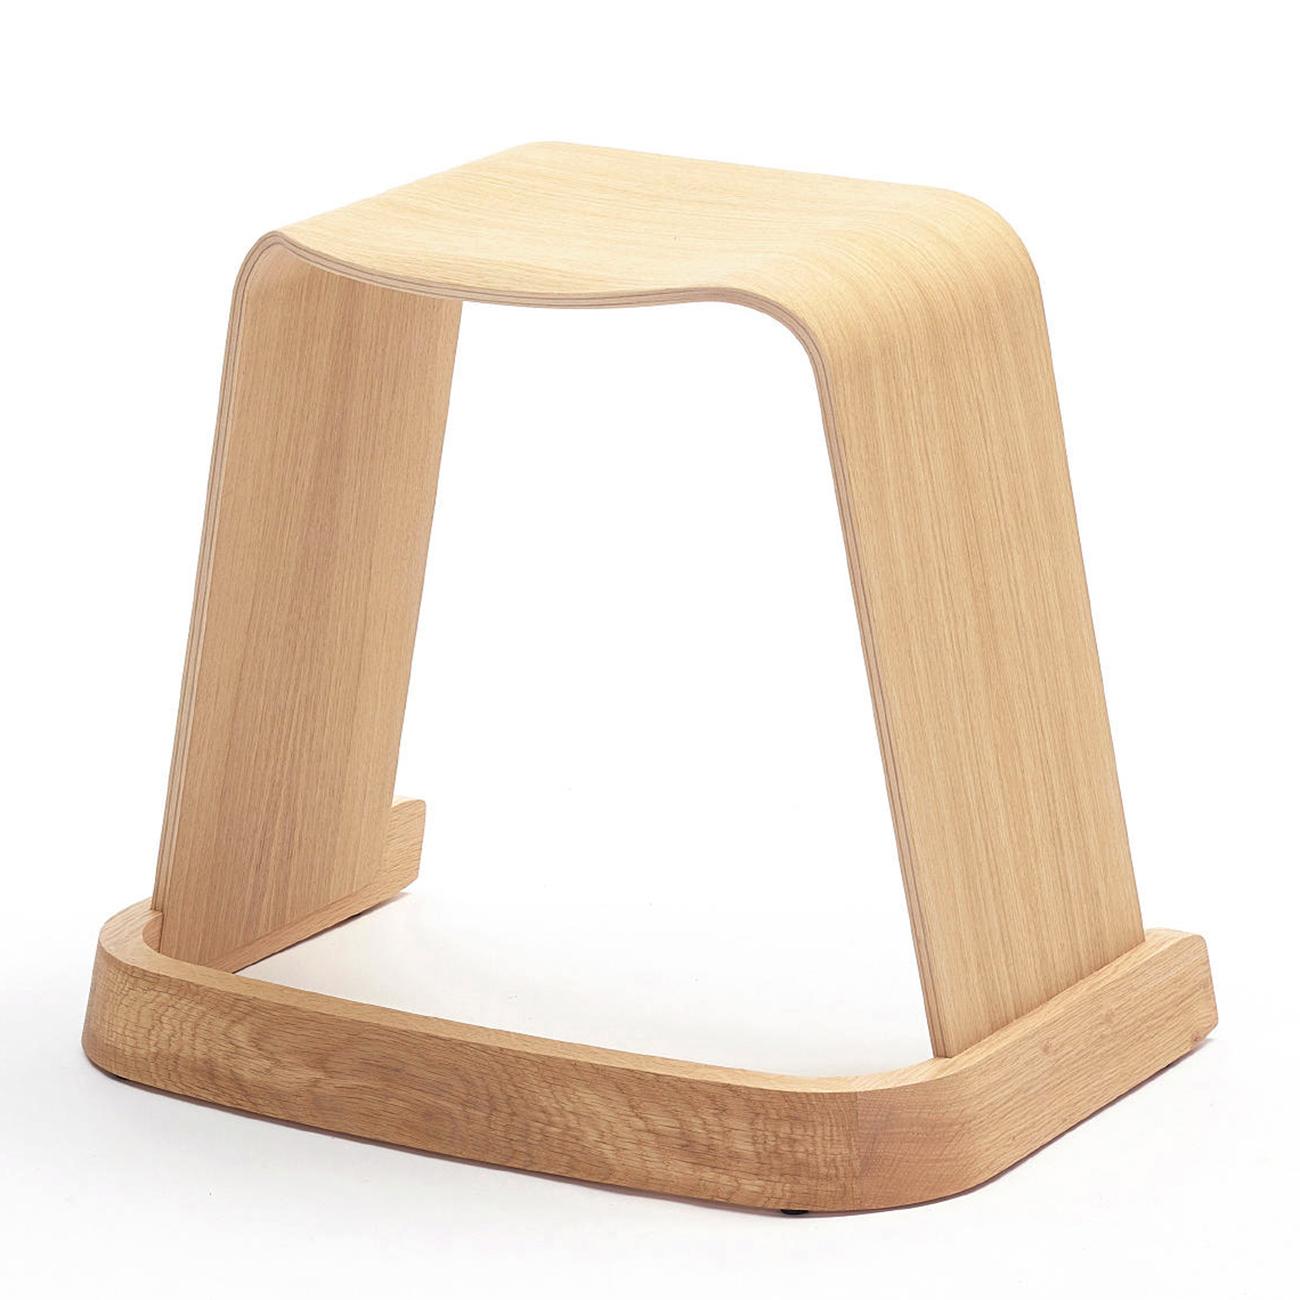 Stool Arch Natural Oak all in solid
hand-crafted oak in natural finish.
Also available in oak in black stained finish, on request.